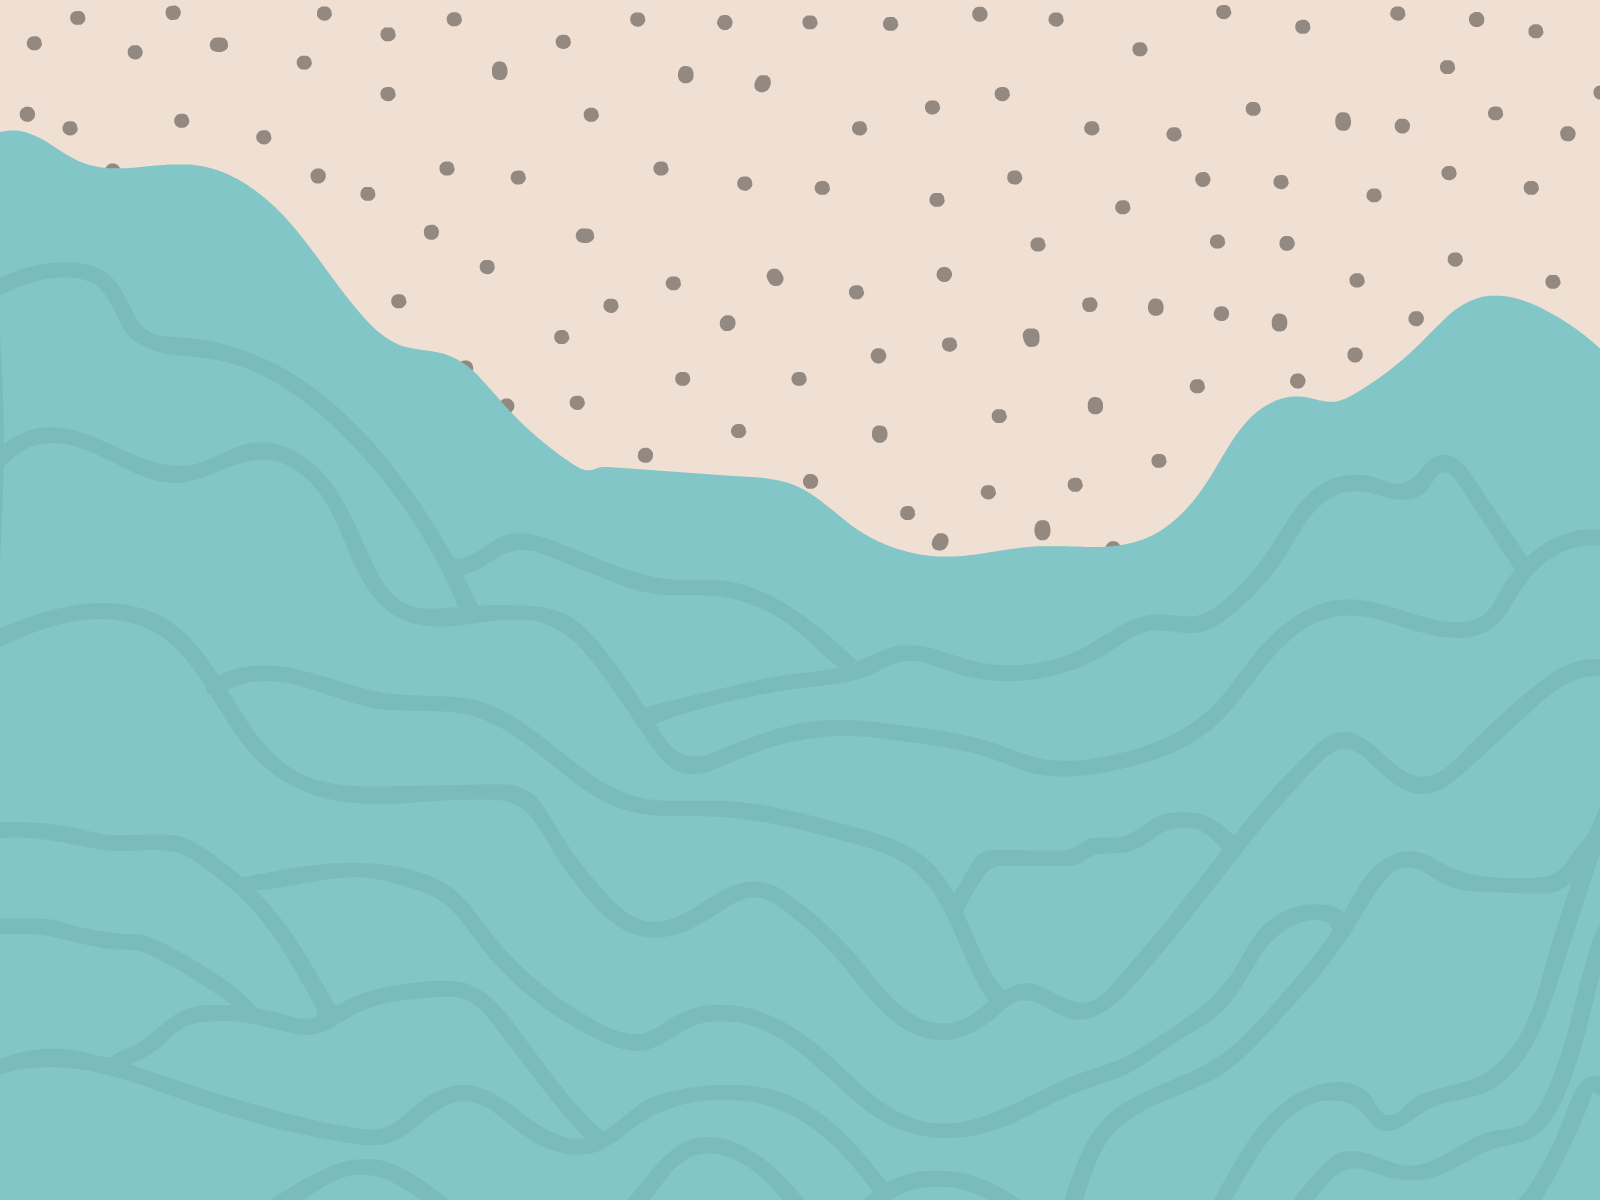 Beach animation adobe animate animate animation animation 2d beach party beach waves chill vibes digital illustration drawing gif animated gif animation graphic design illustration minimal minimalist design relaxing soothing summer vibes vibes